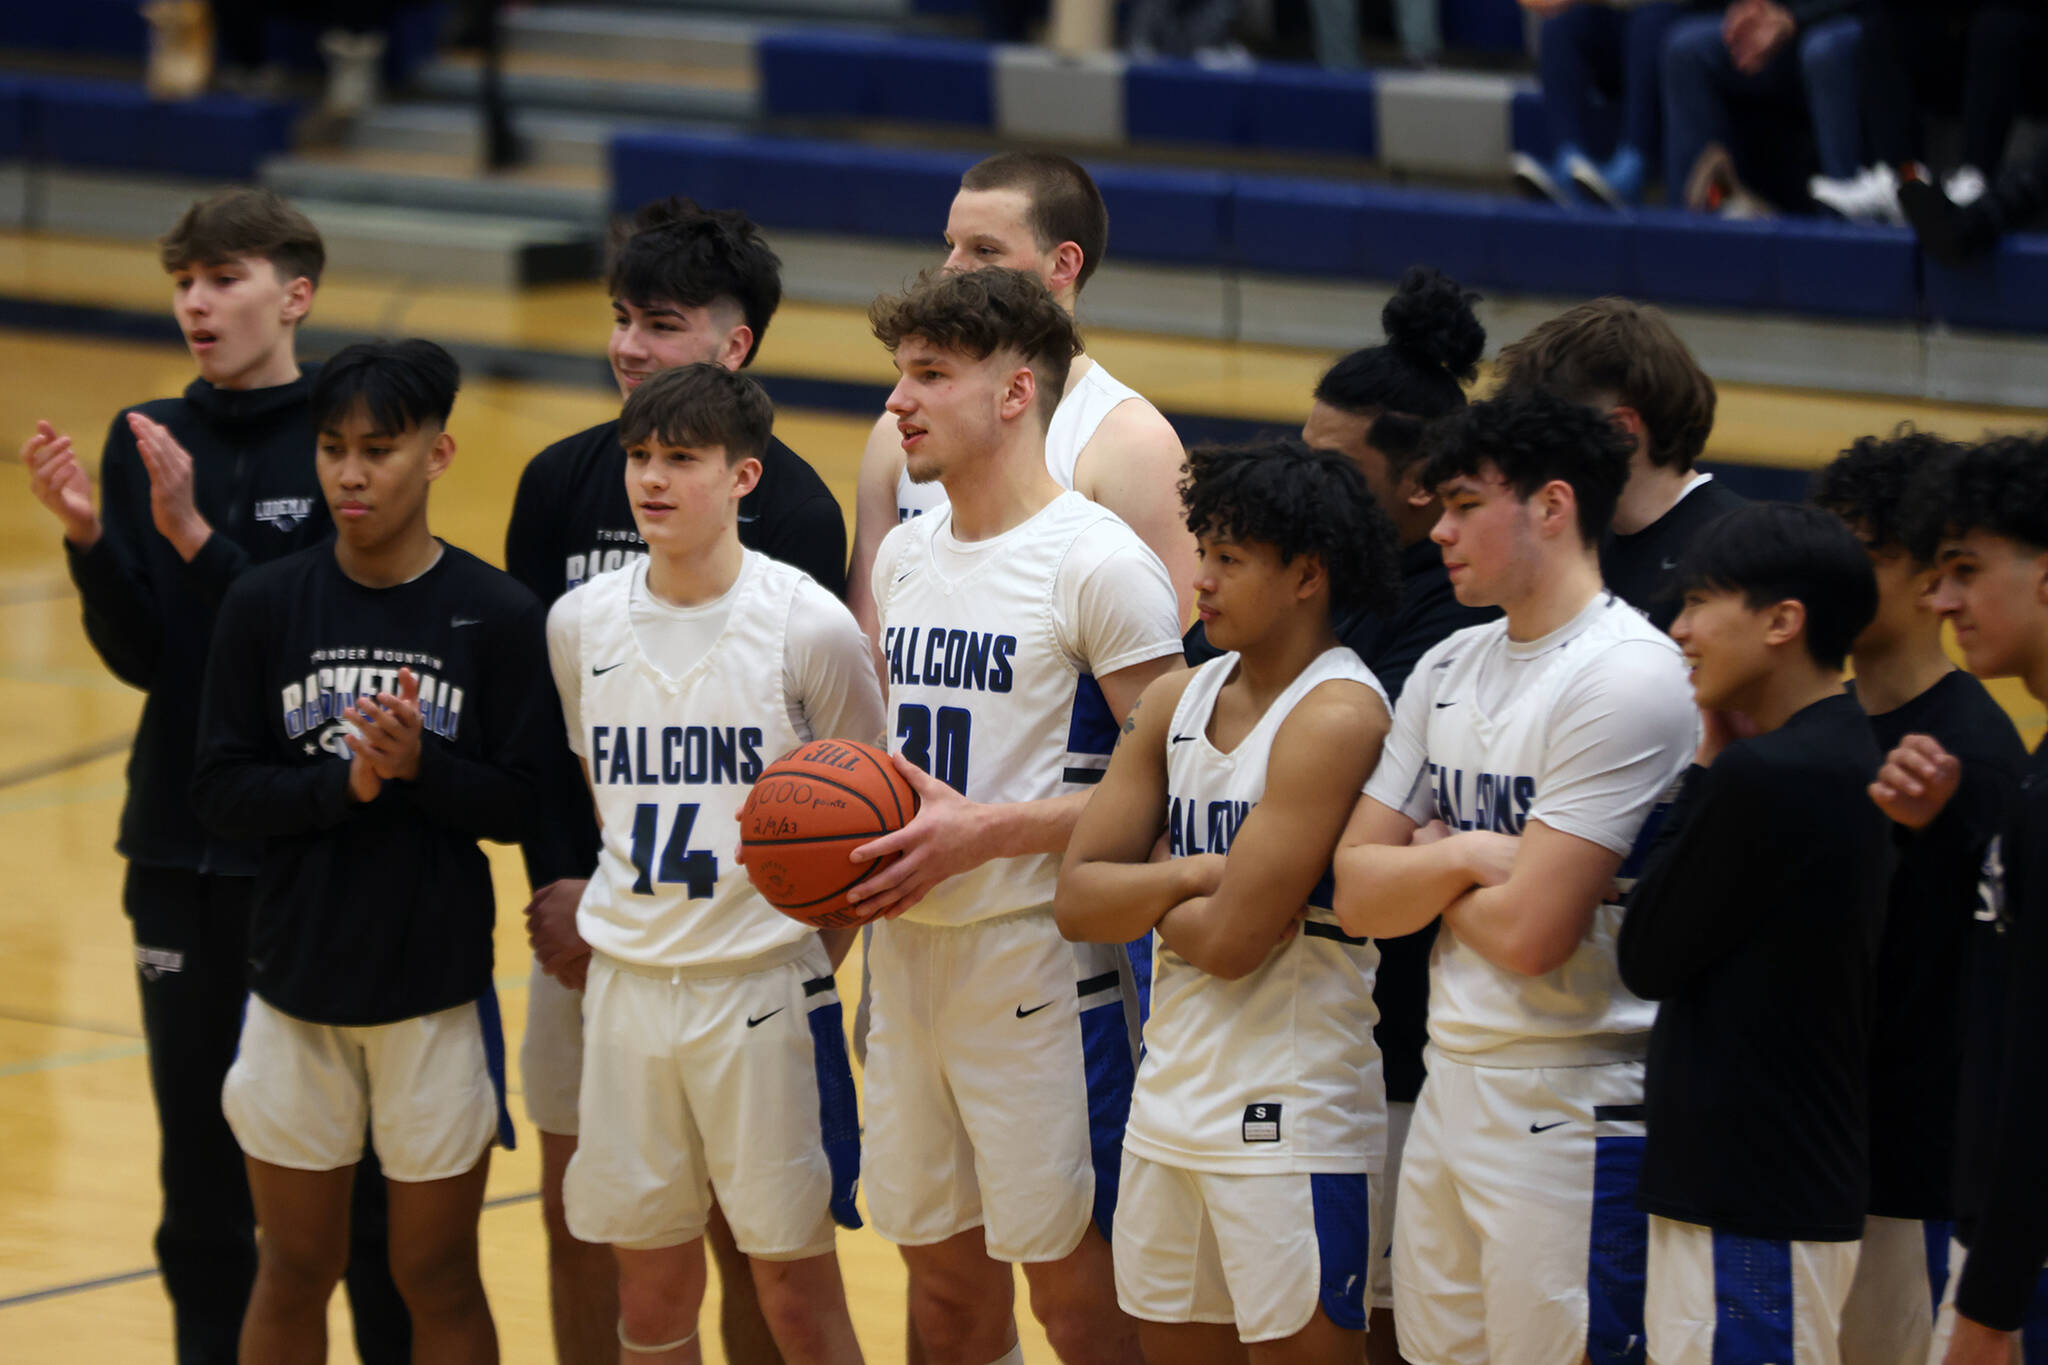 TMHS junior Thomas Baxter (30) stands with teammates before a 64-59 home win against Ketchikan as he is recognized for breaking the 1,000-point mark. (Ben Hohenstatt / Juneau Empire)